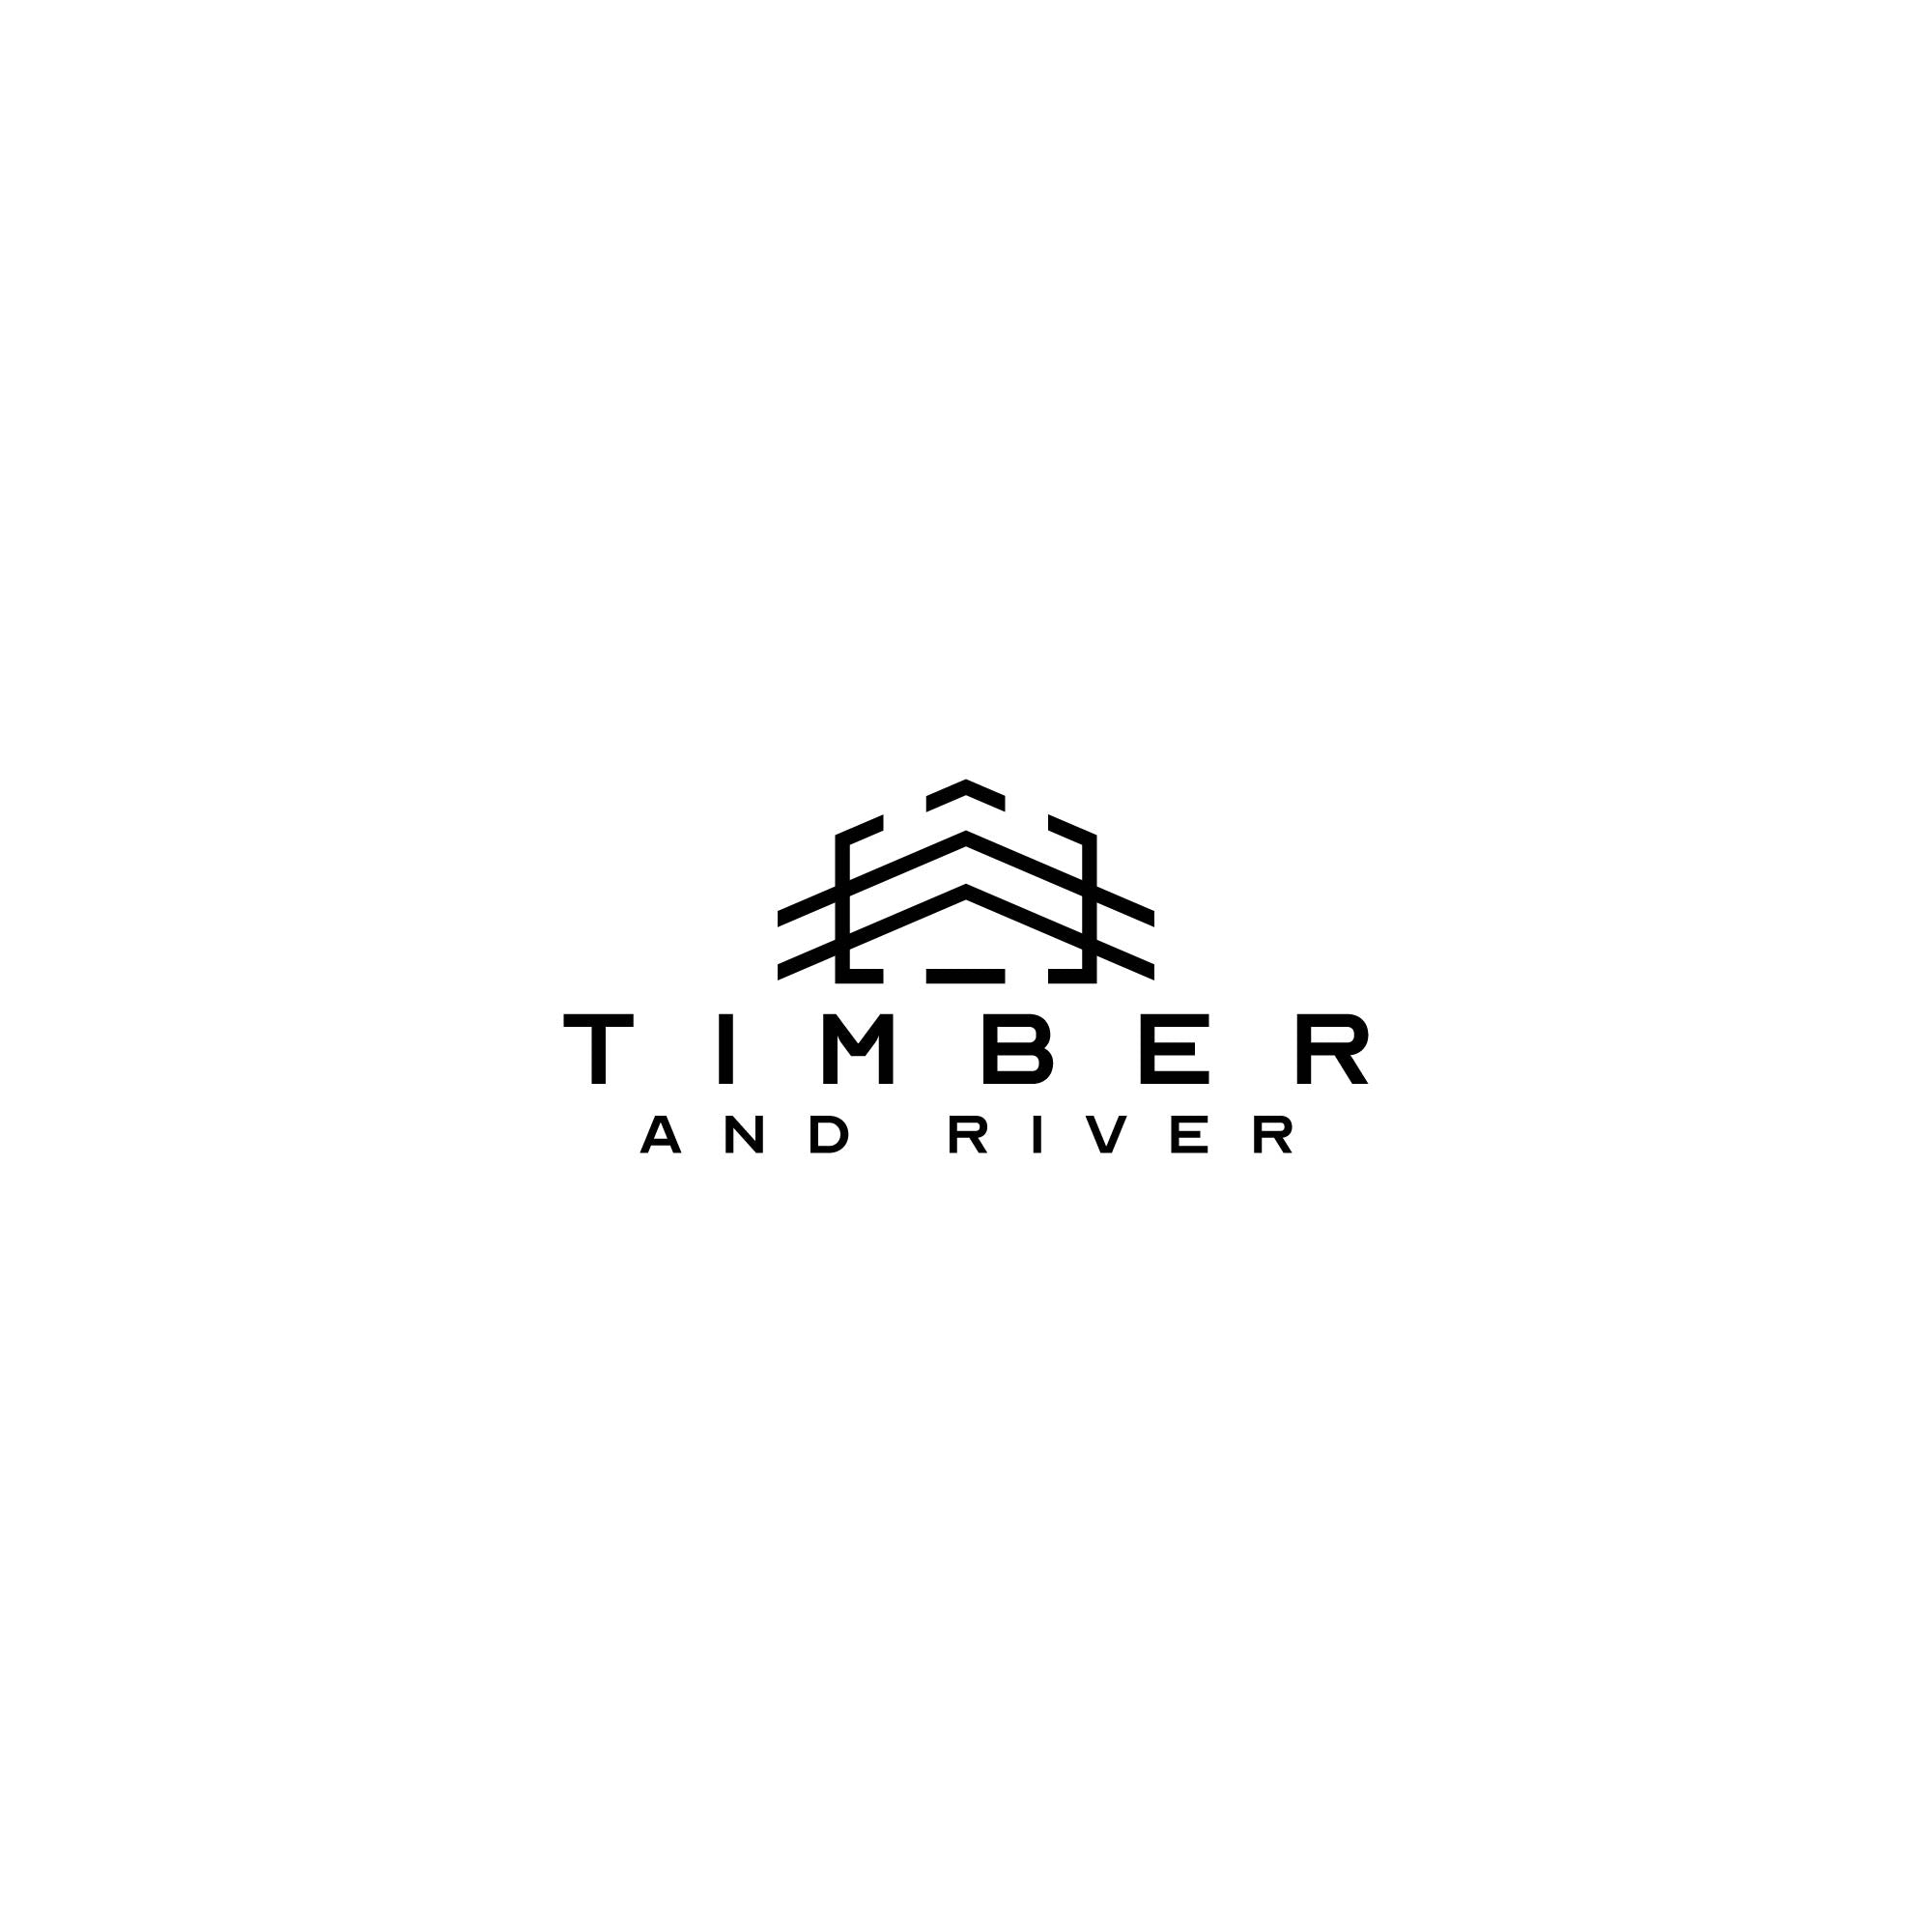 Timber and River